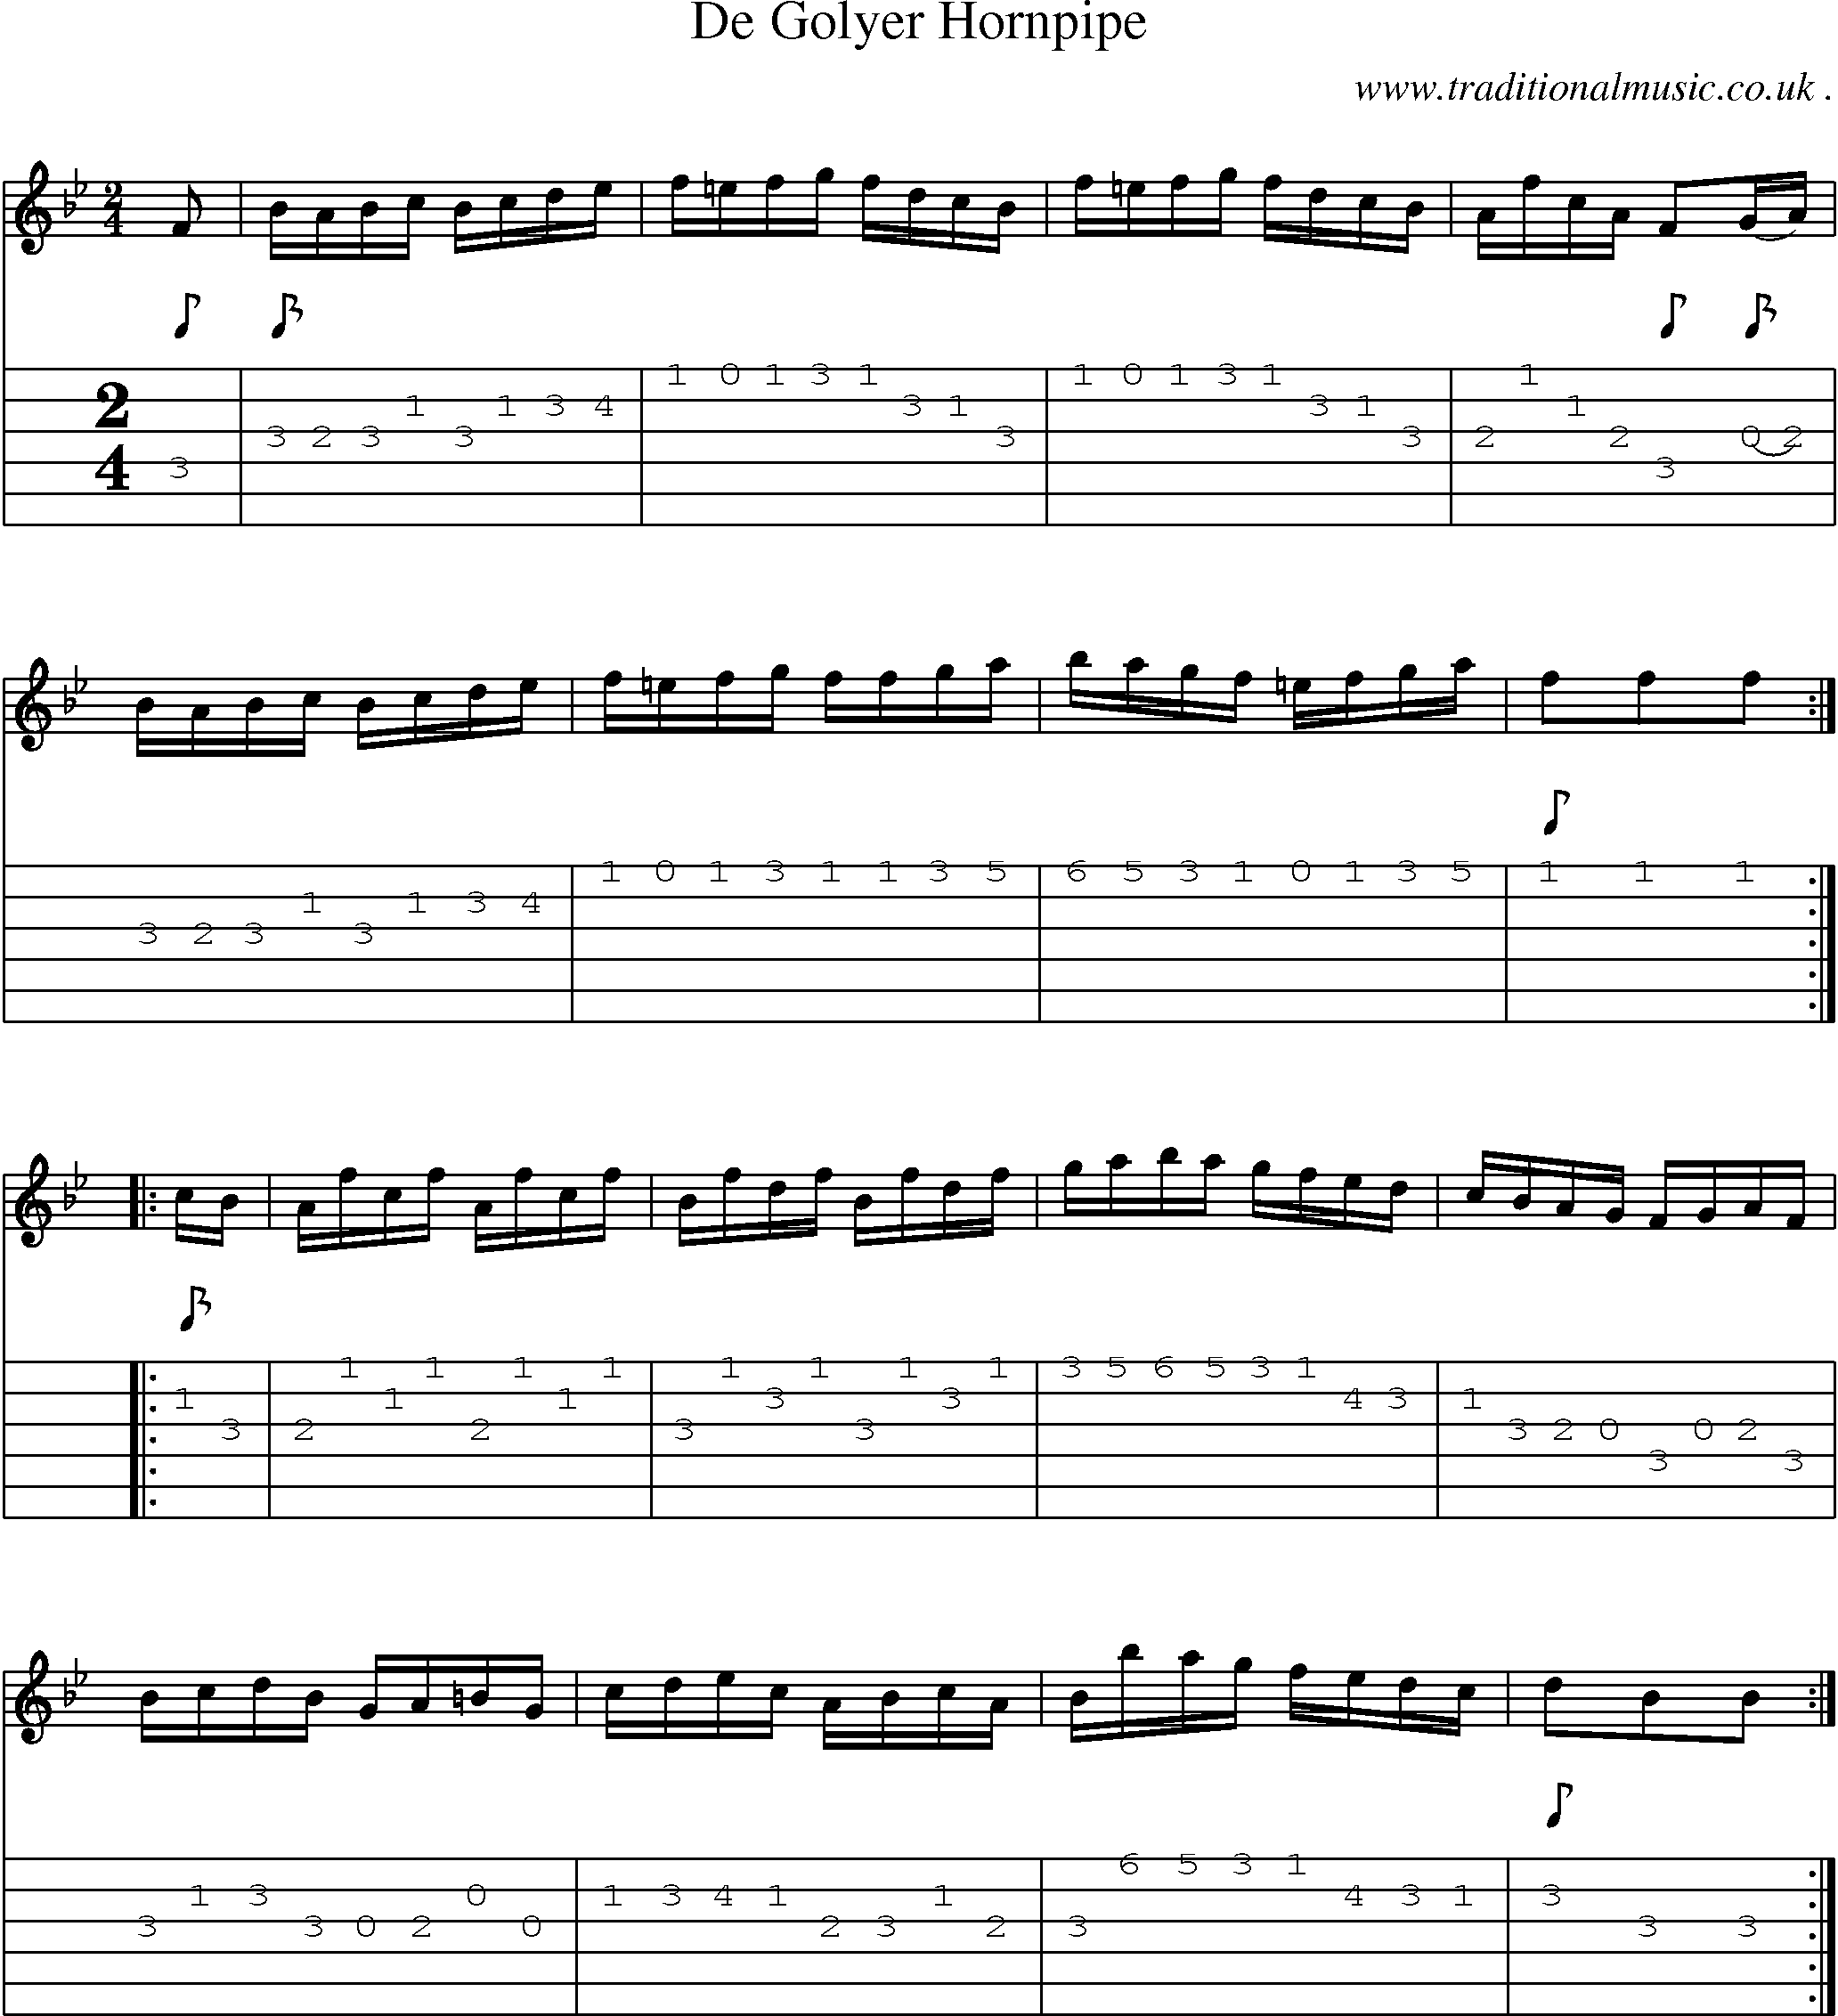 Sheet-Music and Guitar Tabs for De Golyer Hornpipe